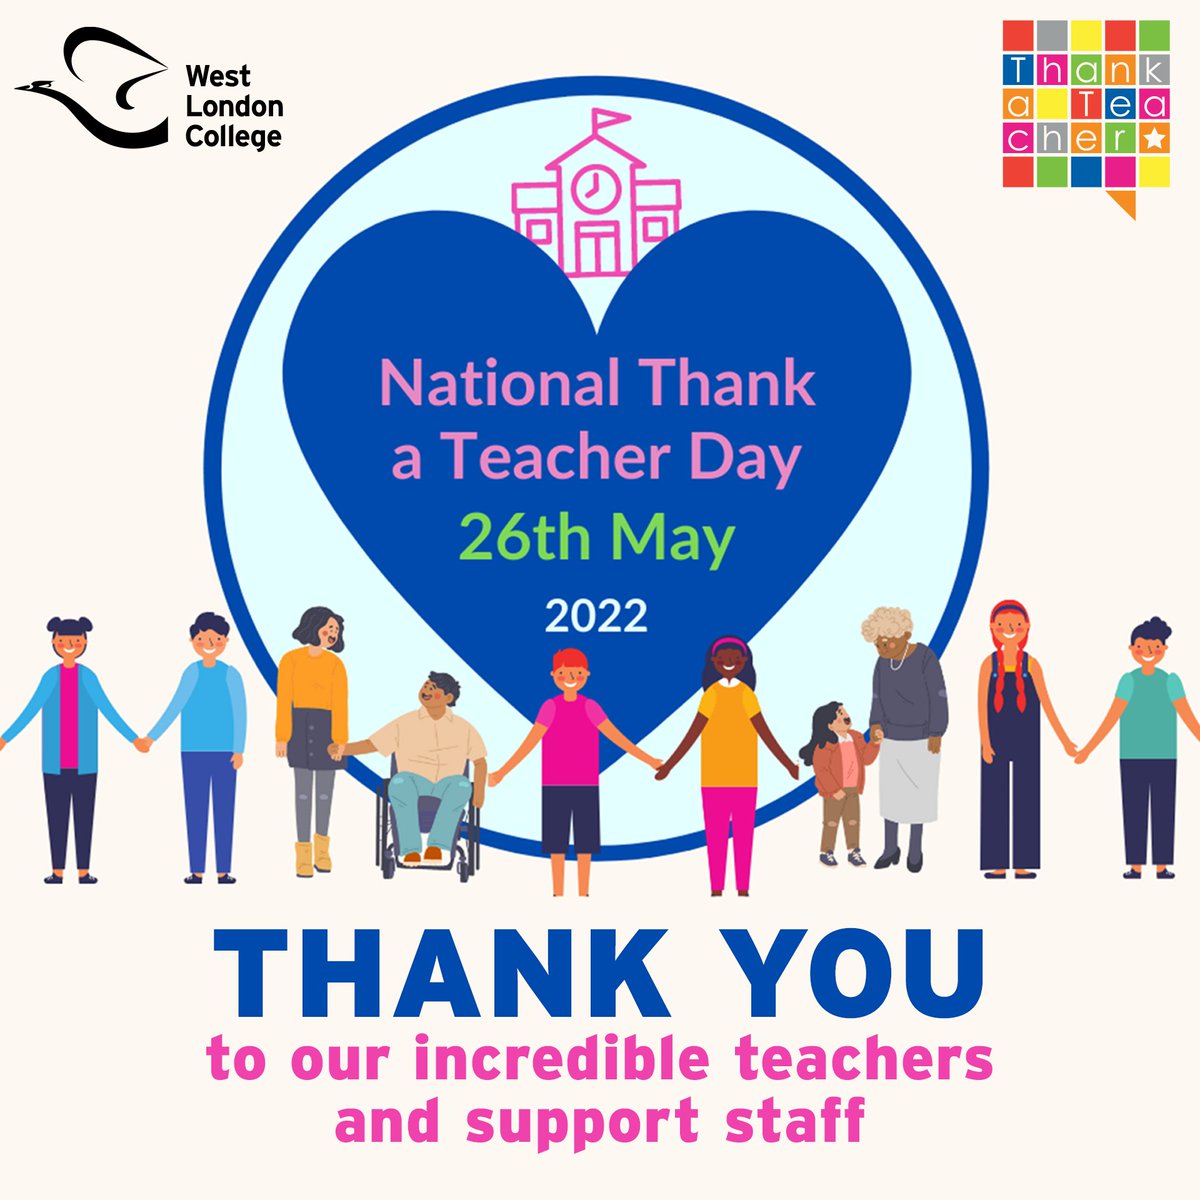 It's #NationalThankATeacher Day TODAY, an annual celebration of schools, colleges, teachers+support staff across the country. Thanks to all our marvellous teachers+staff who work so hard often in challenging circumstances to make sure every student reaches their full potential!